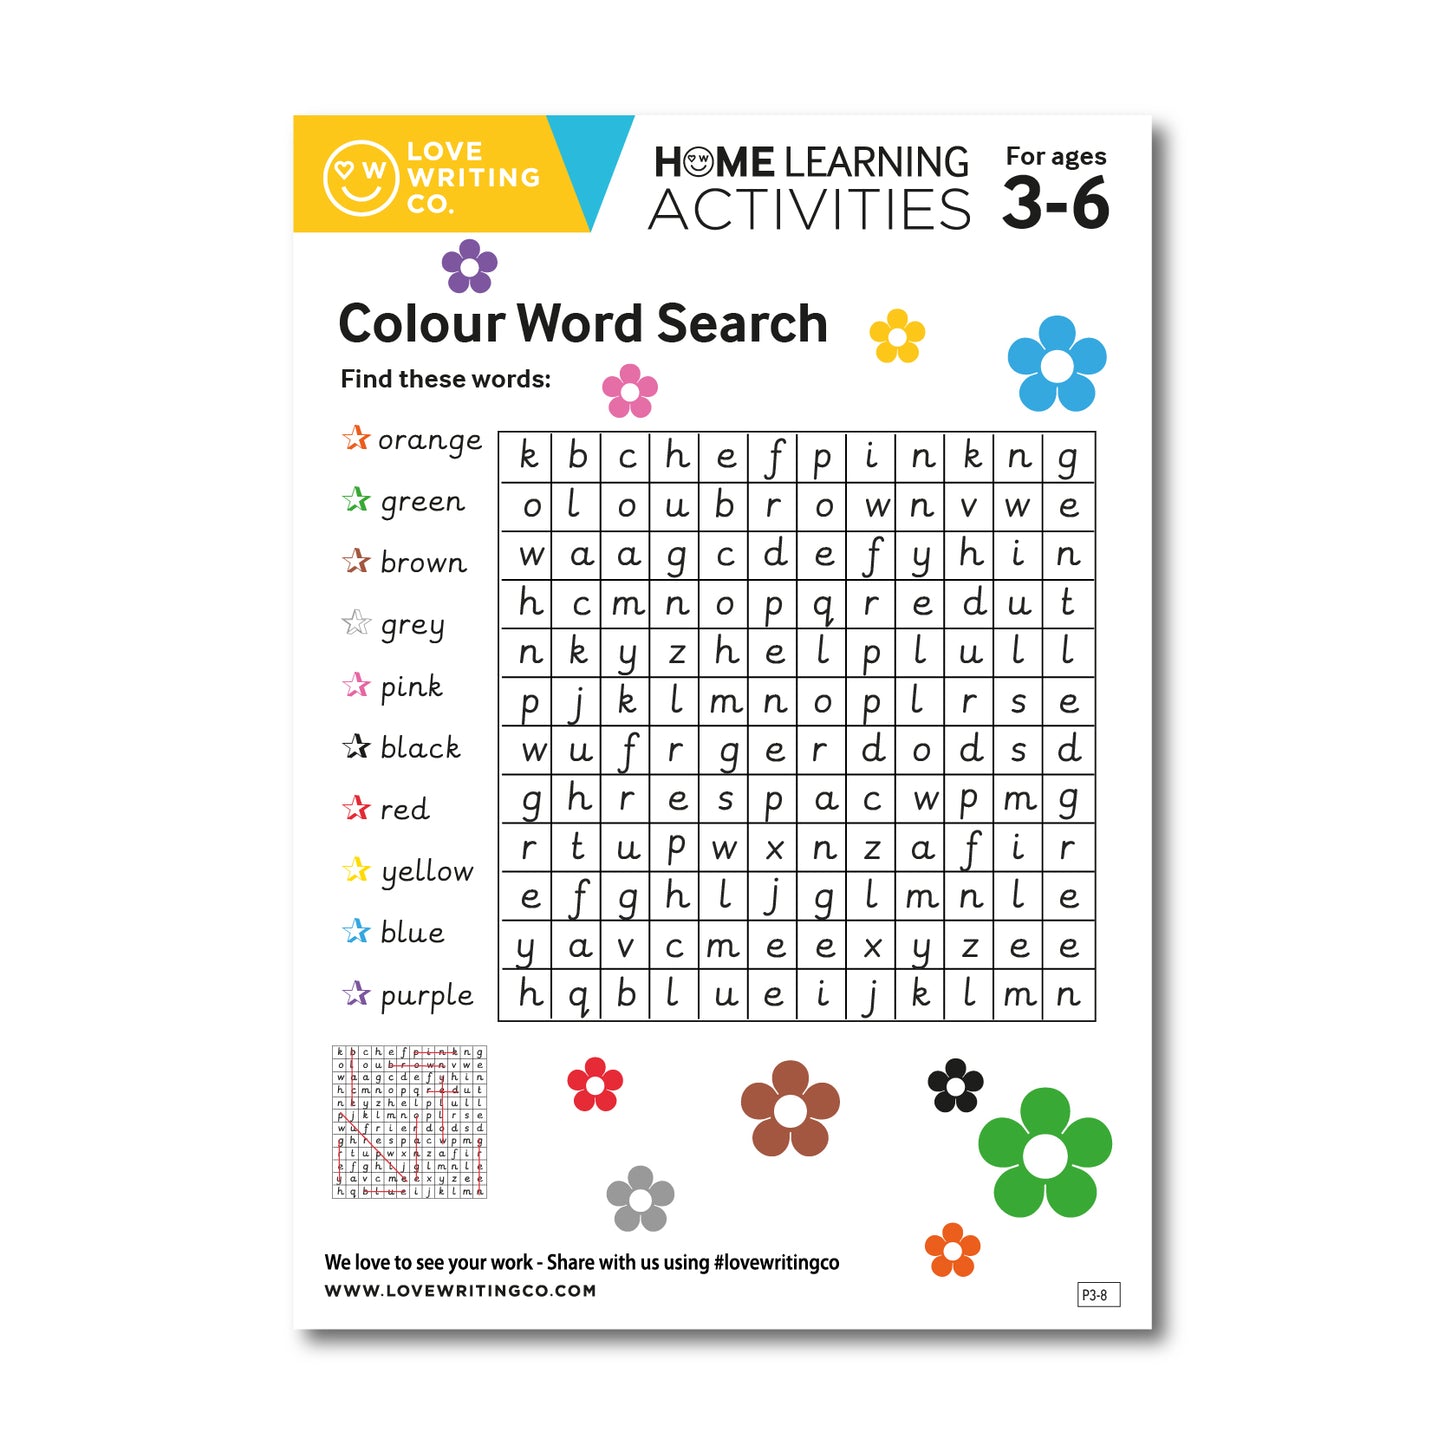 Colour word search activity